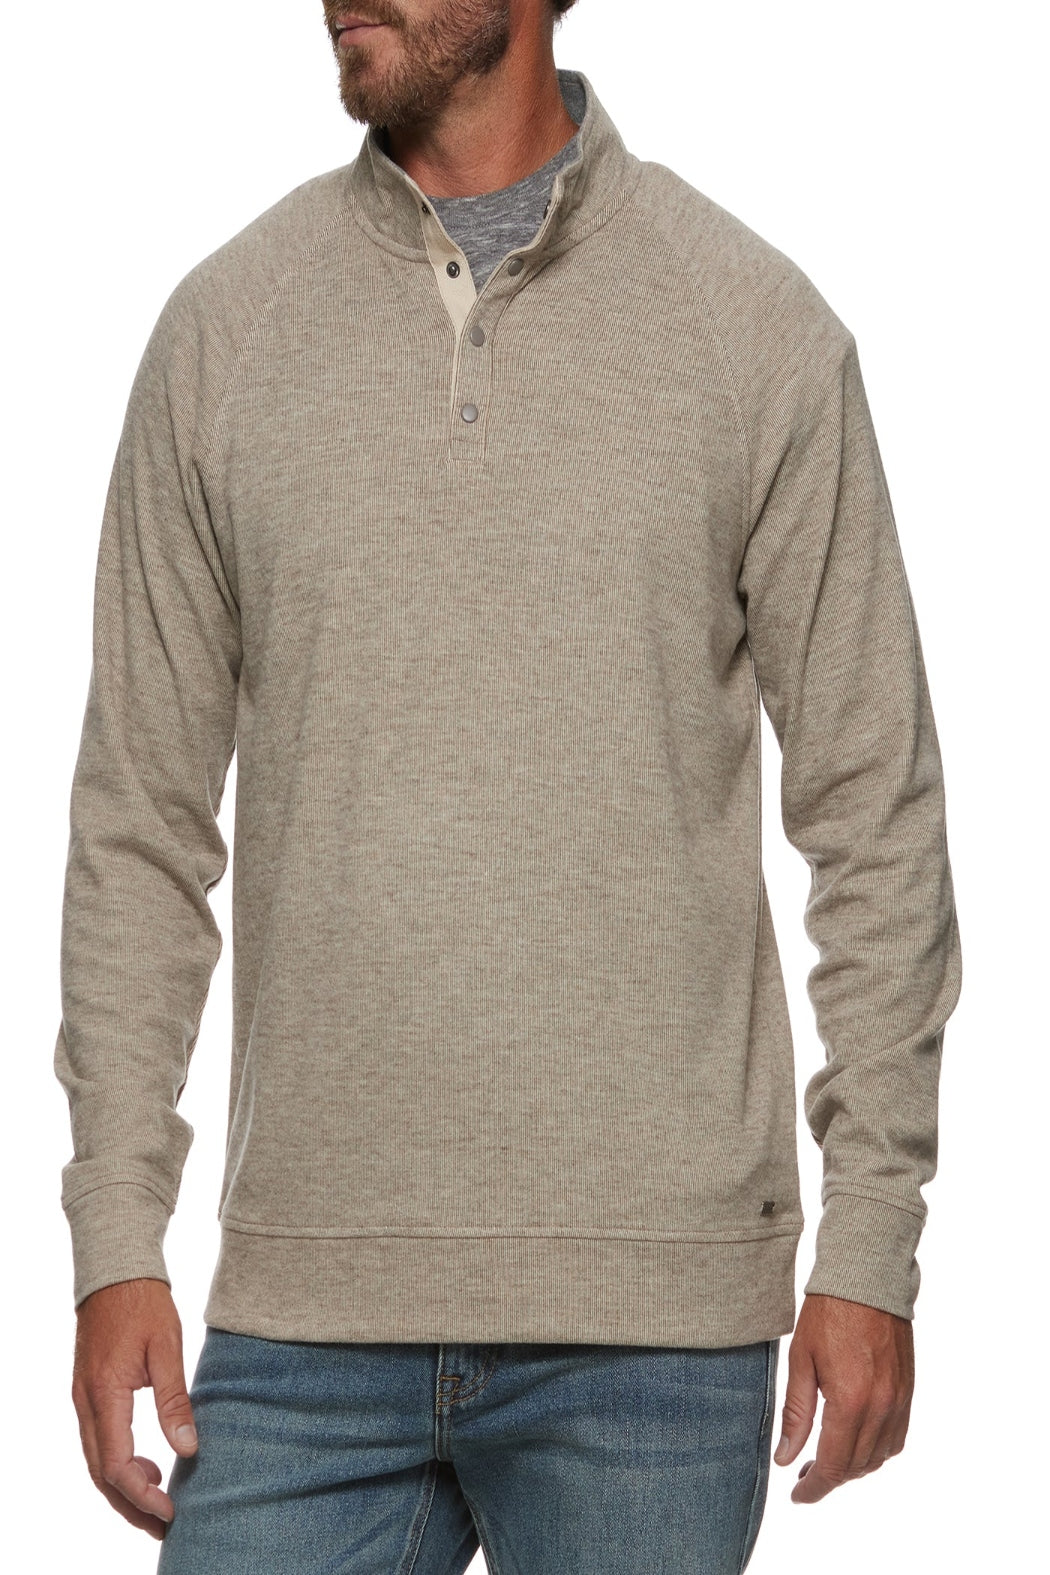 Hero Textured Stretch ¼ Snap Pullover